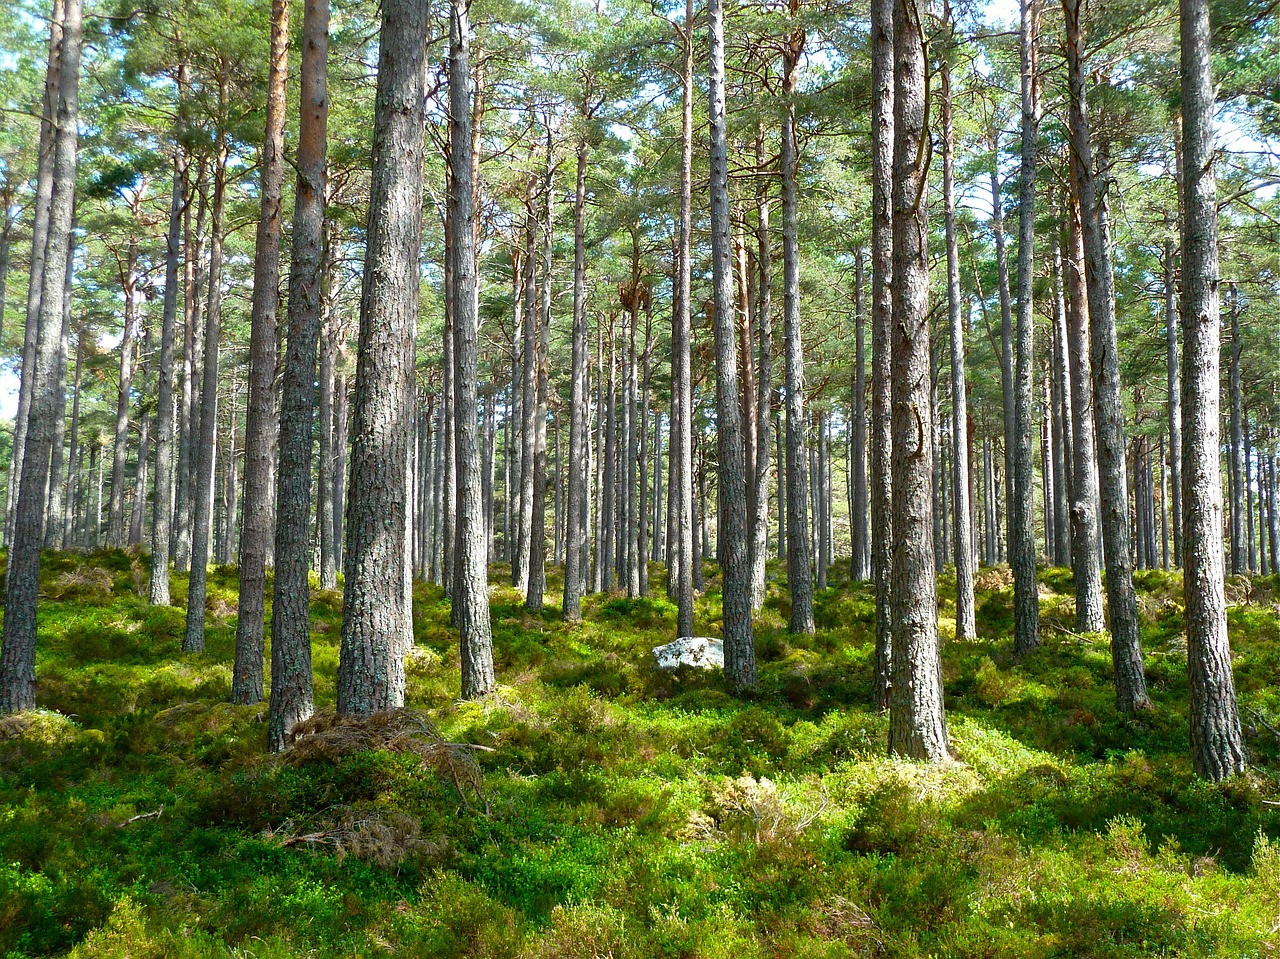 a sunny woodland or forest that appears sustainably managed